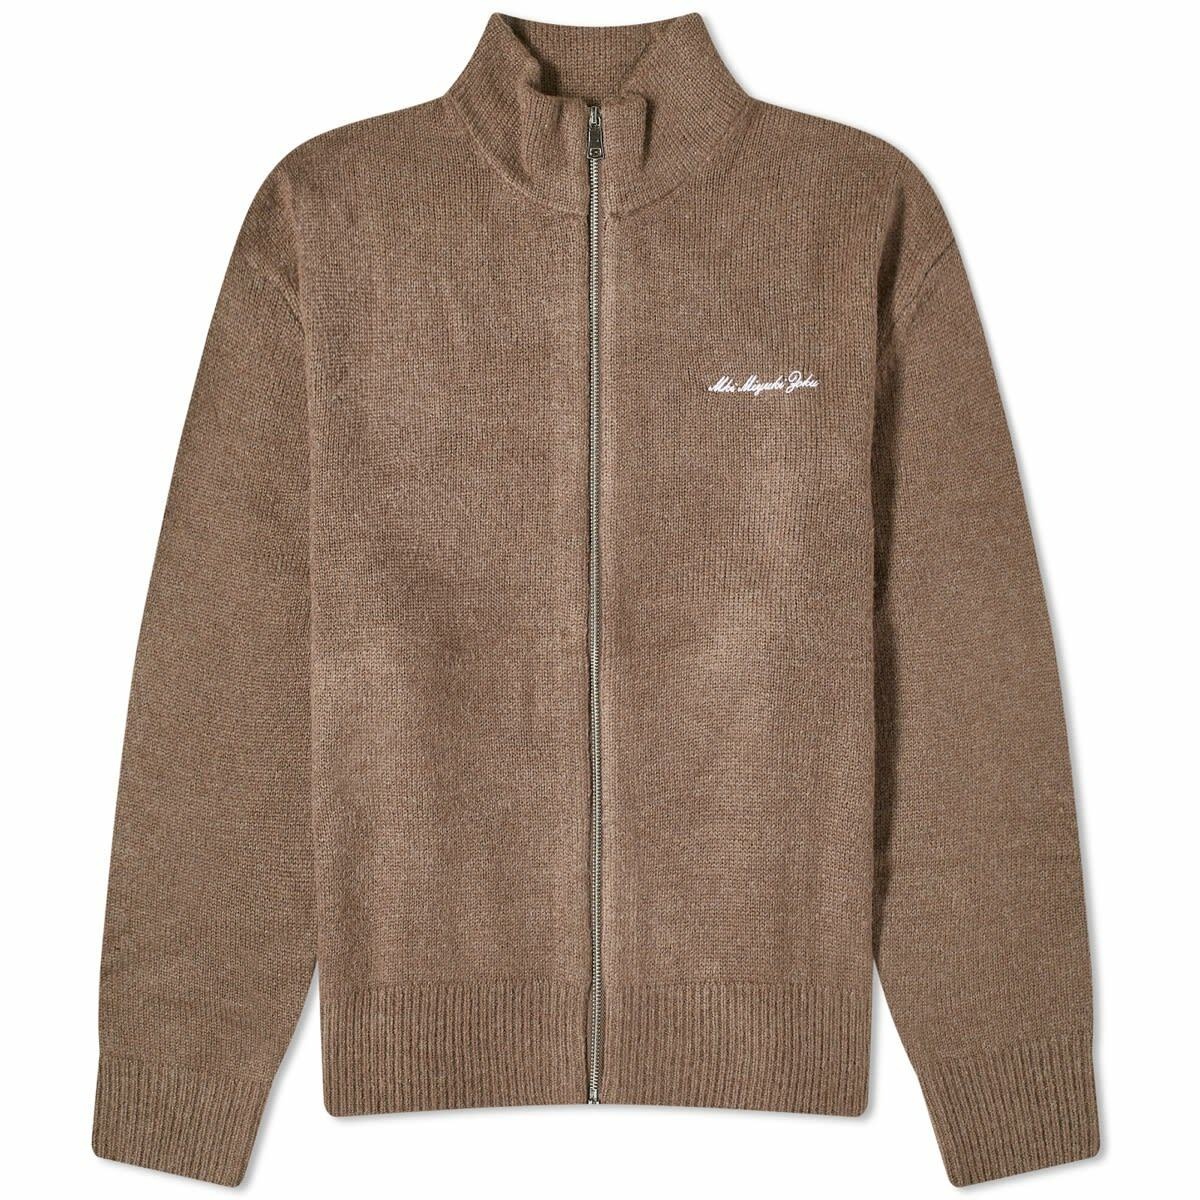 Photo: MKI Men's Mohair Blend Knit Track Jacket in Brown